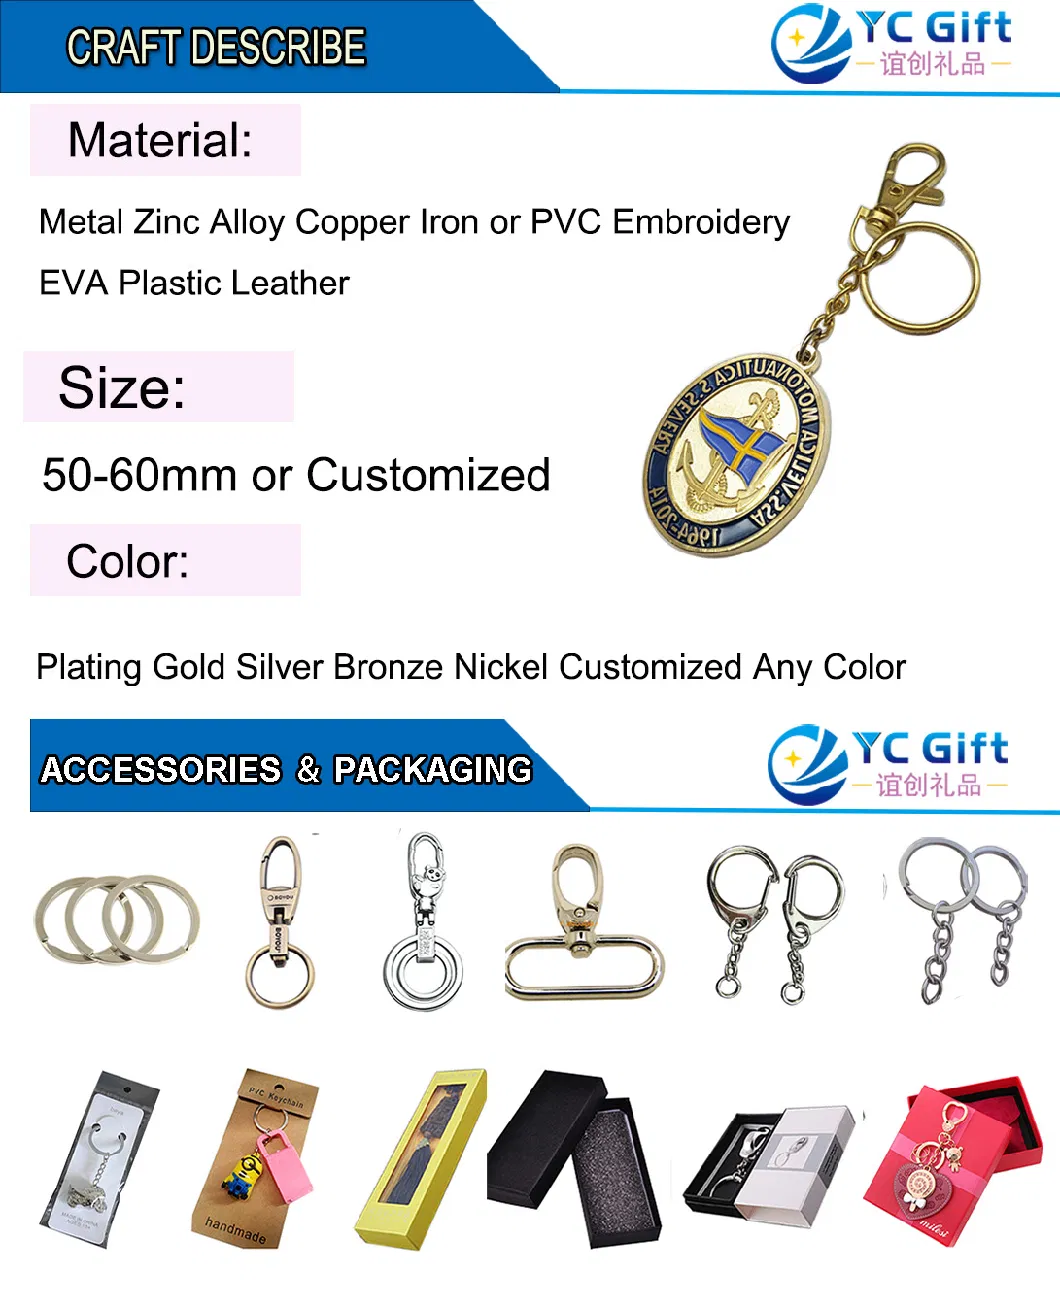 Hot Bottle Opener Coin Holder Promotional Items Custom Key Chain Metal Articles Decoration